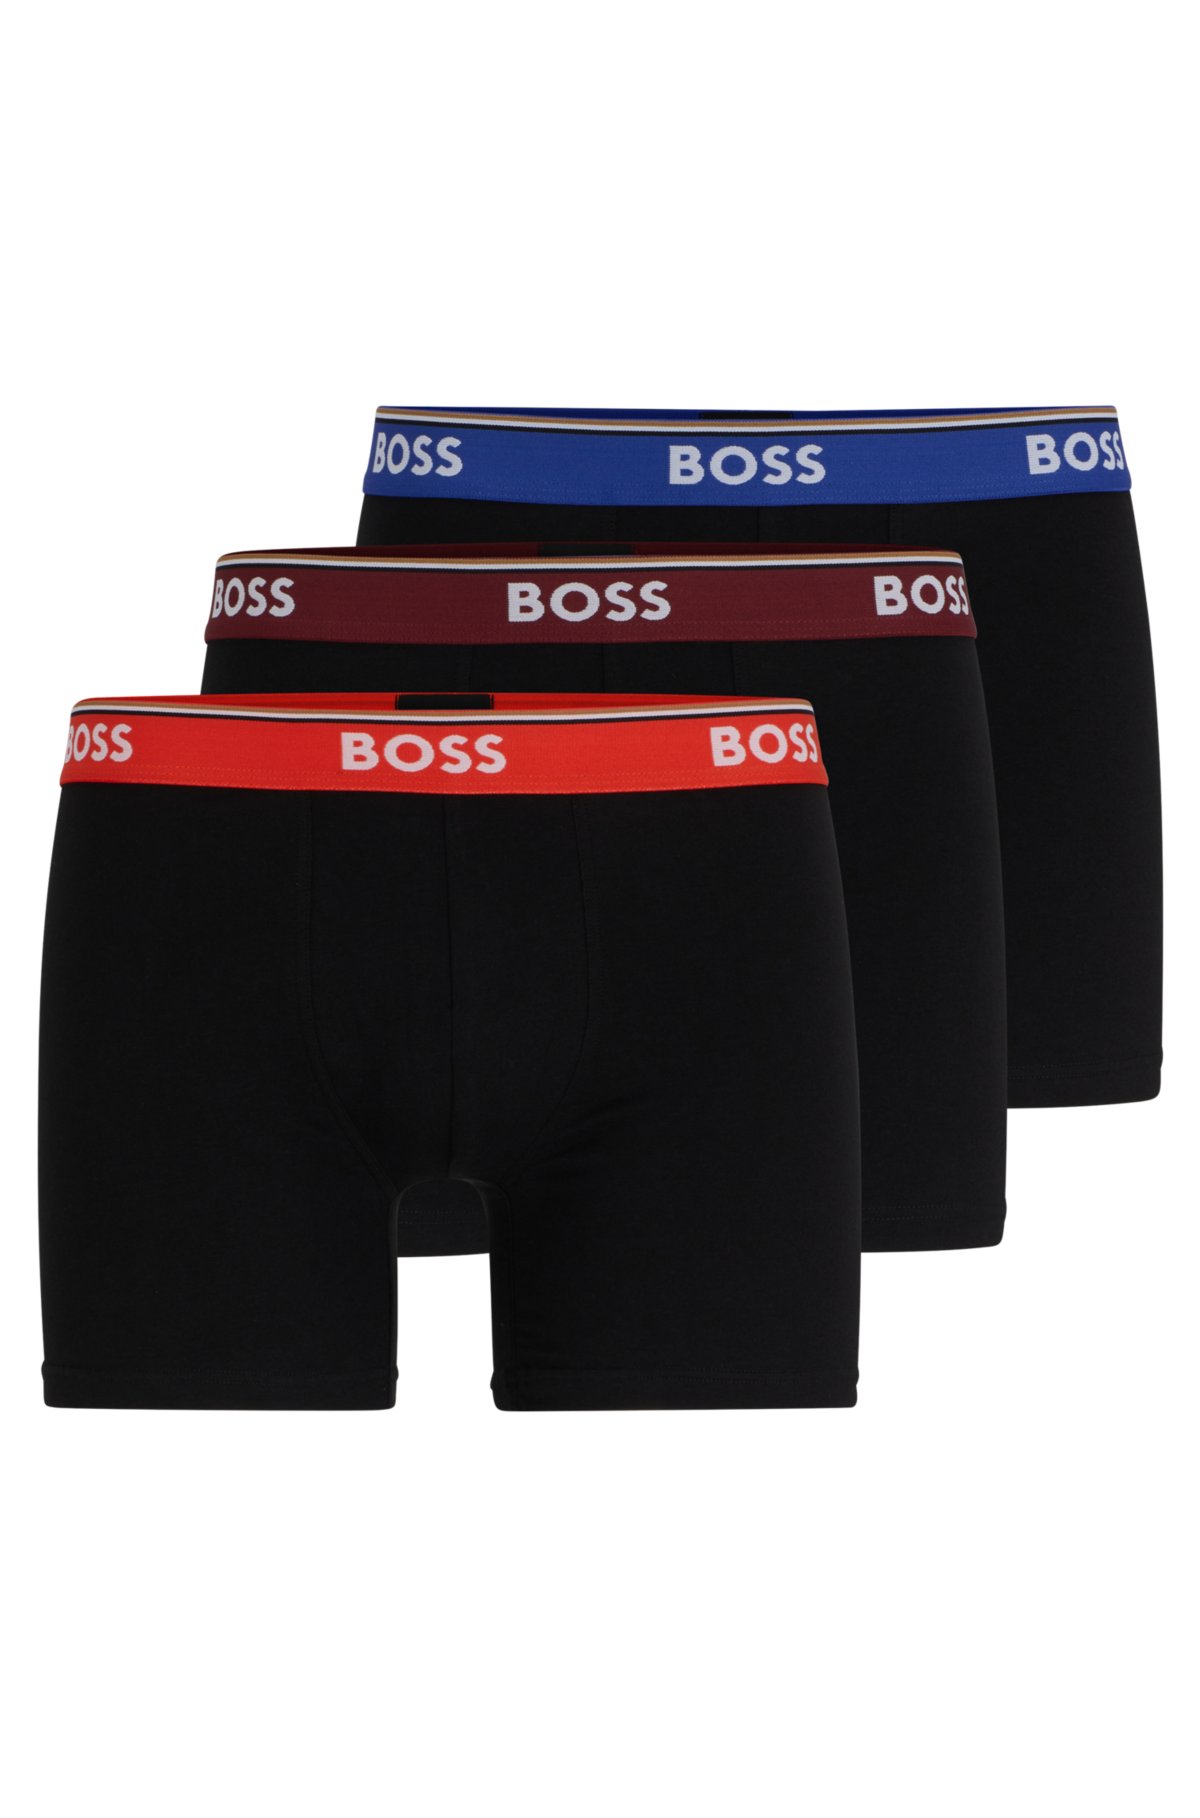 Three-gun underwear for men, white cotton, middle-aged and elderly,  high-waisted, loose, cotton, red